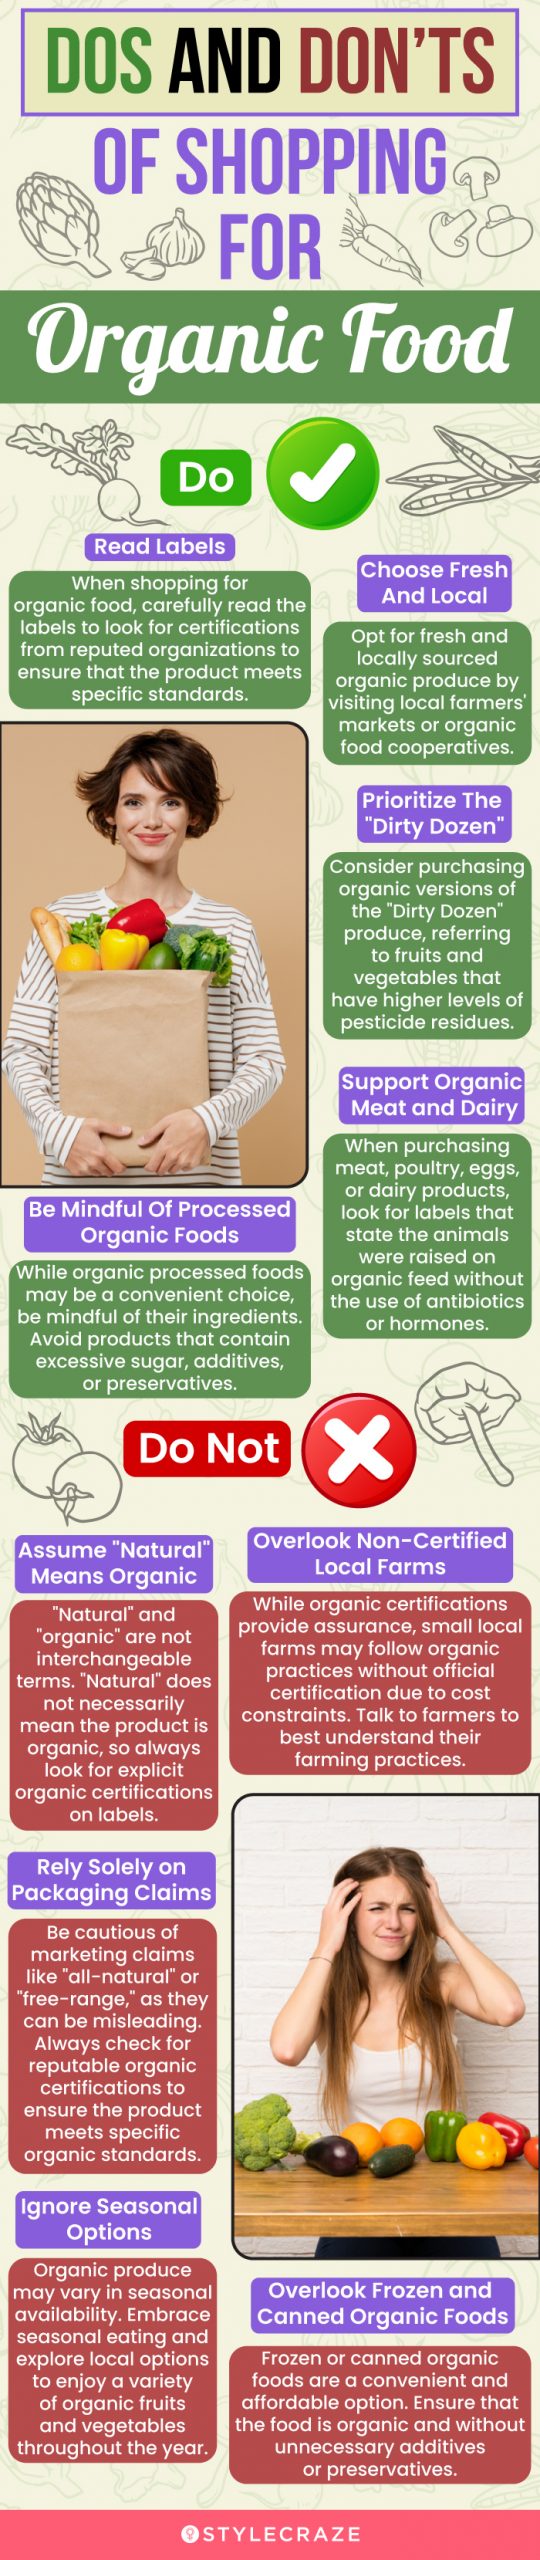 dos and don’ts of shopping for organic food (infographic)